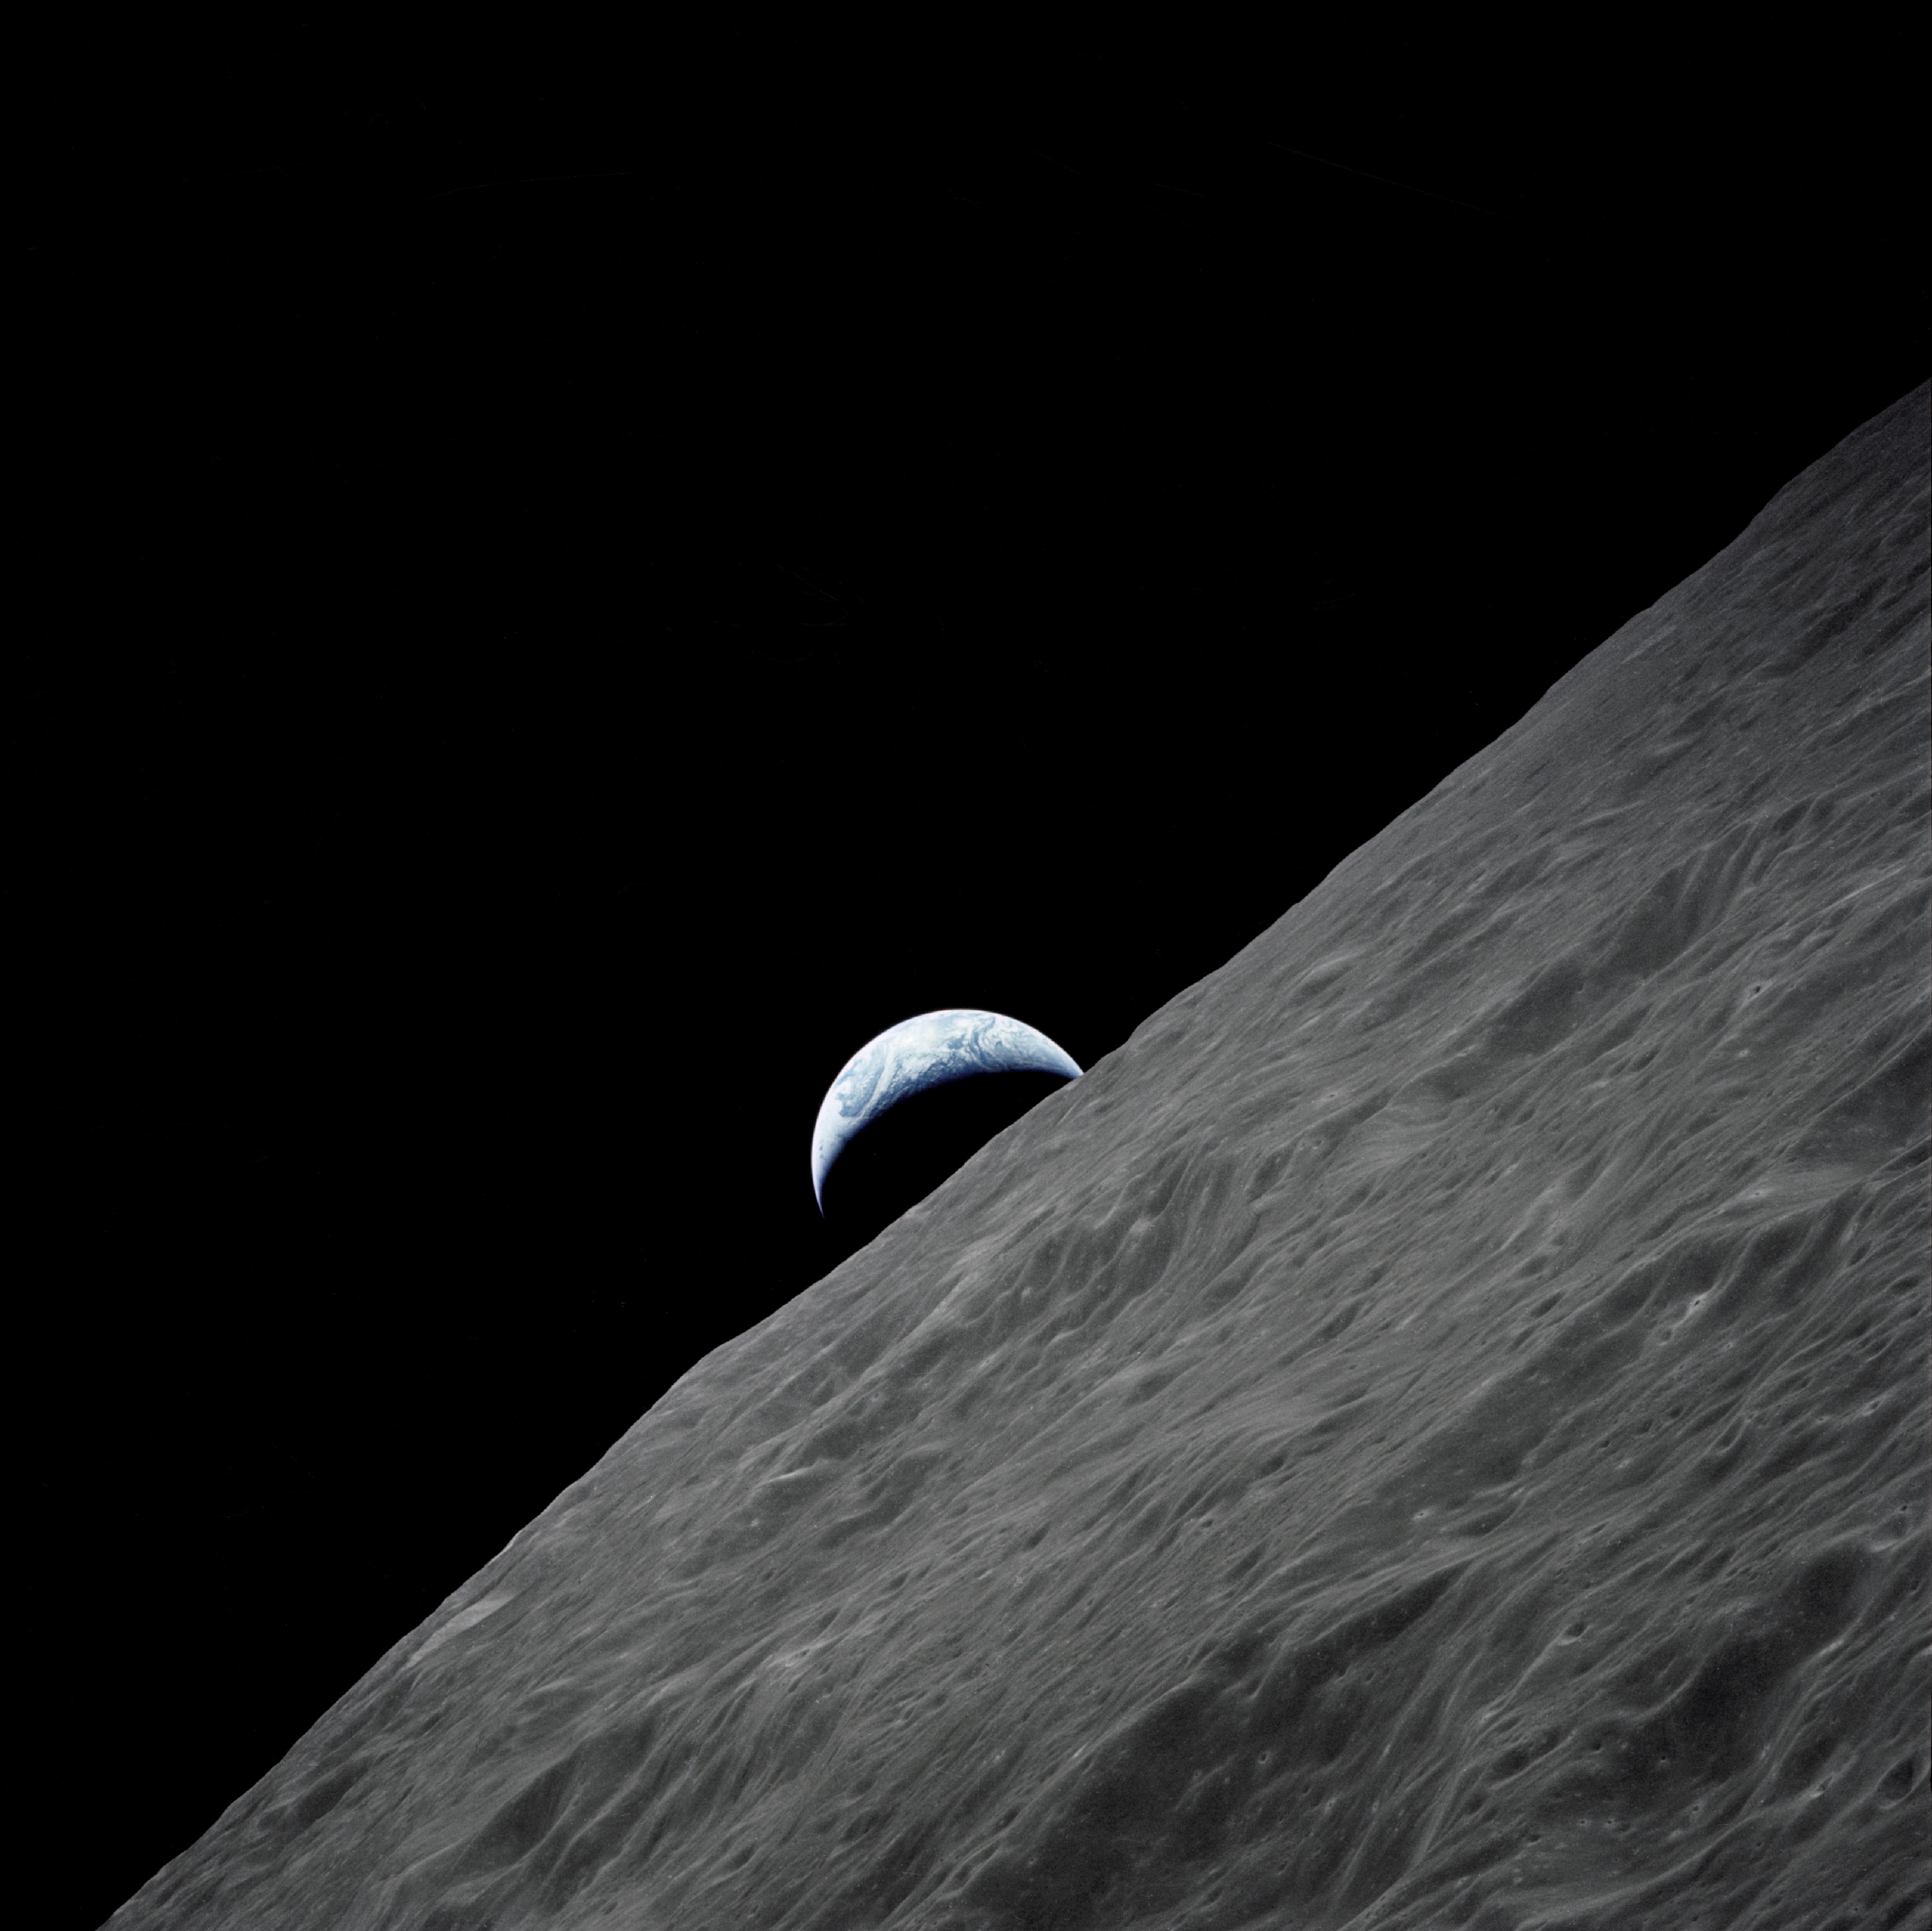 Earth from the moon photo